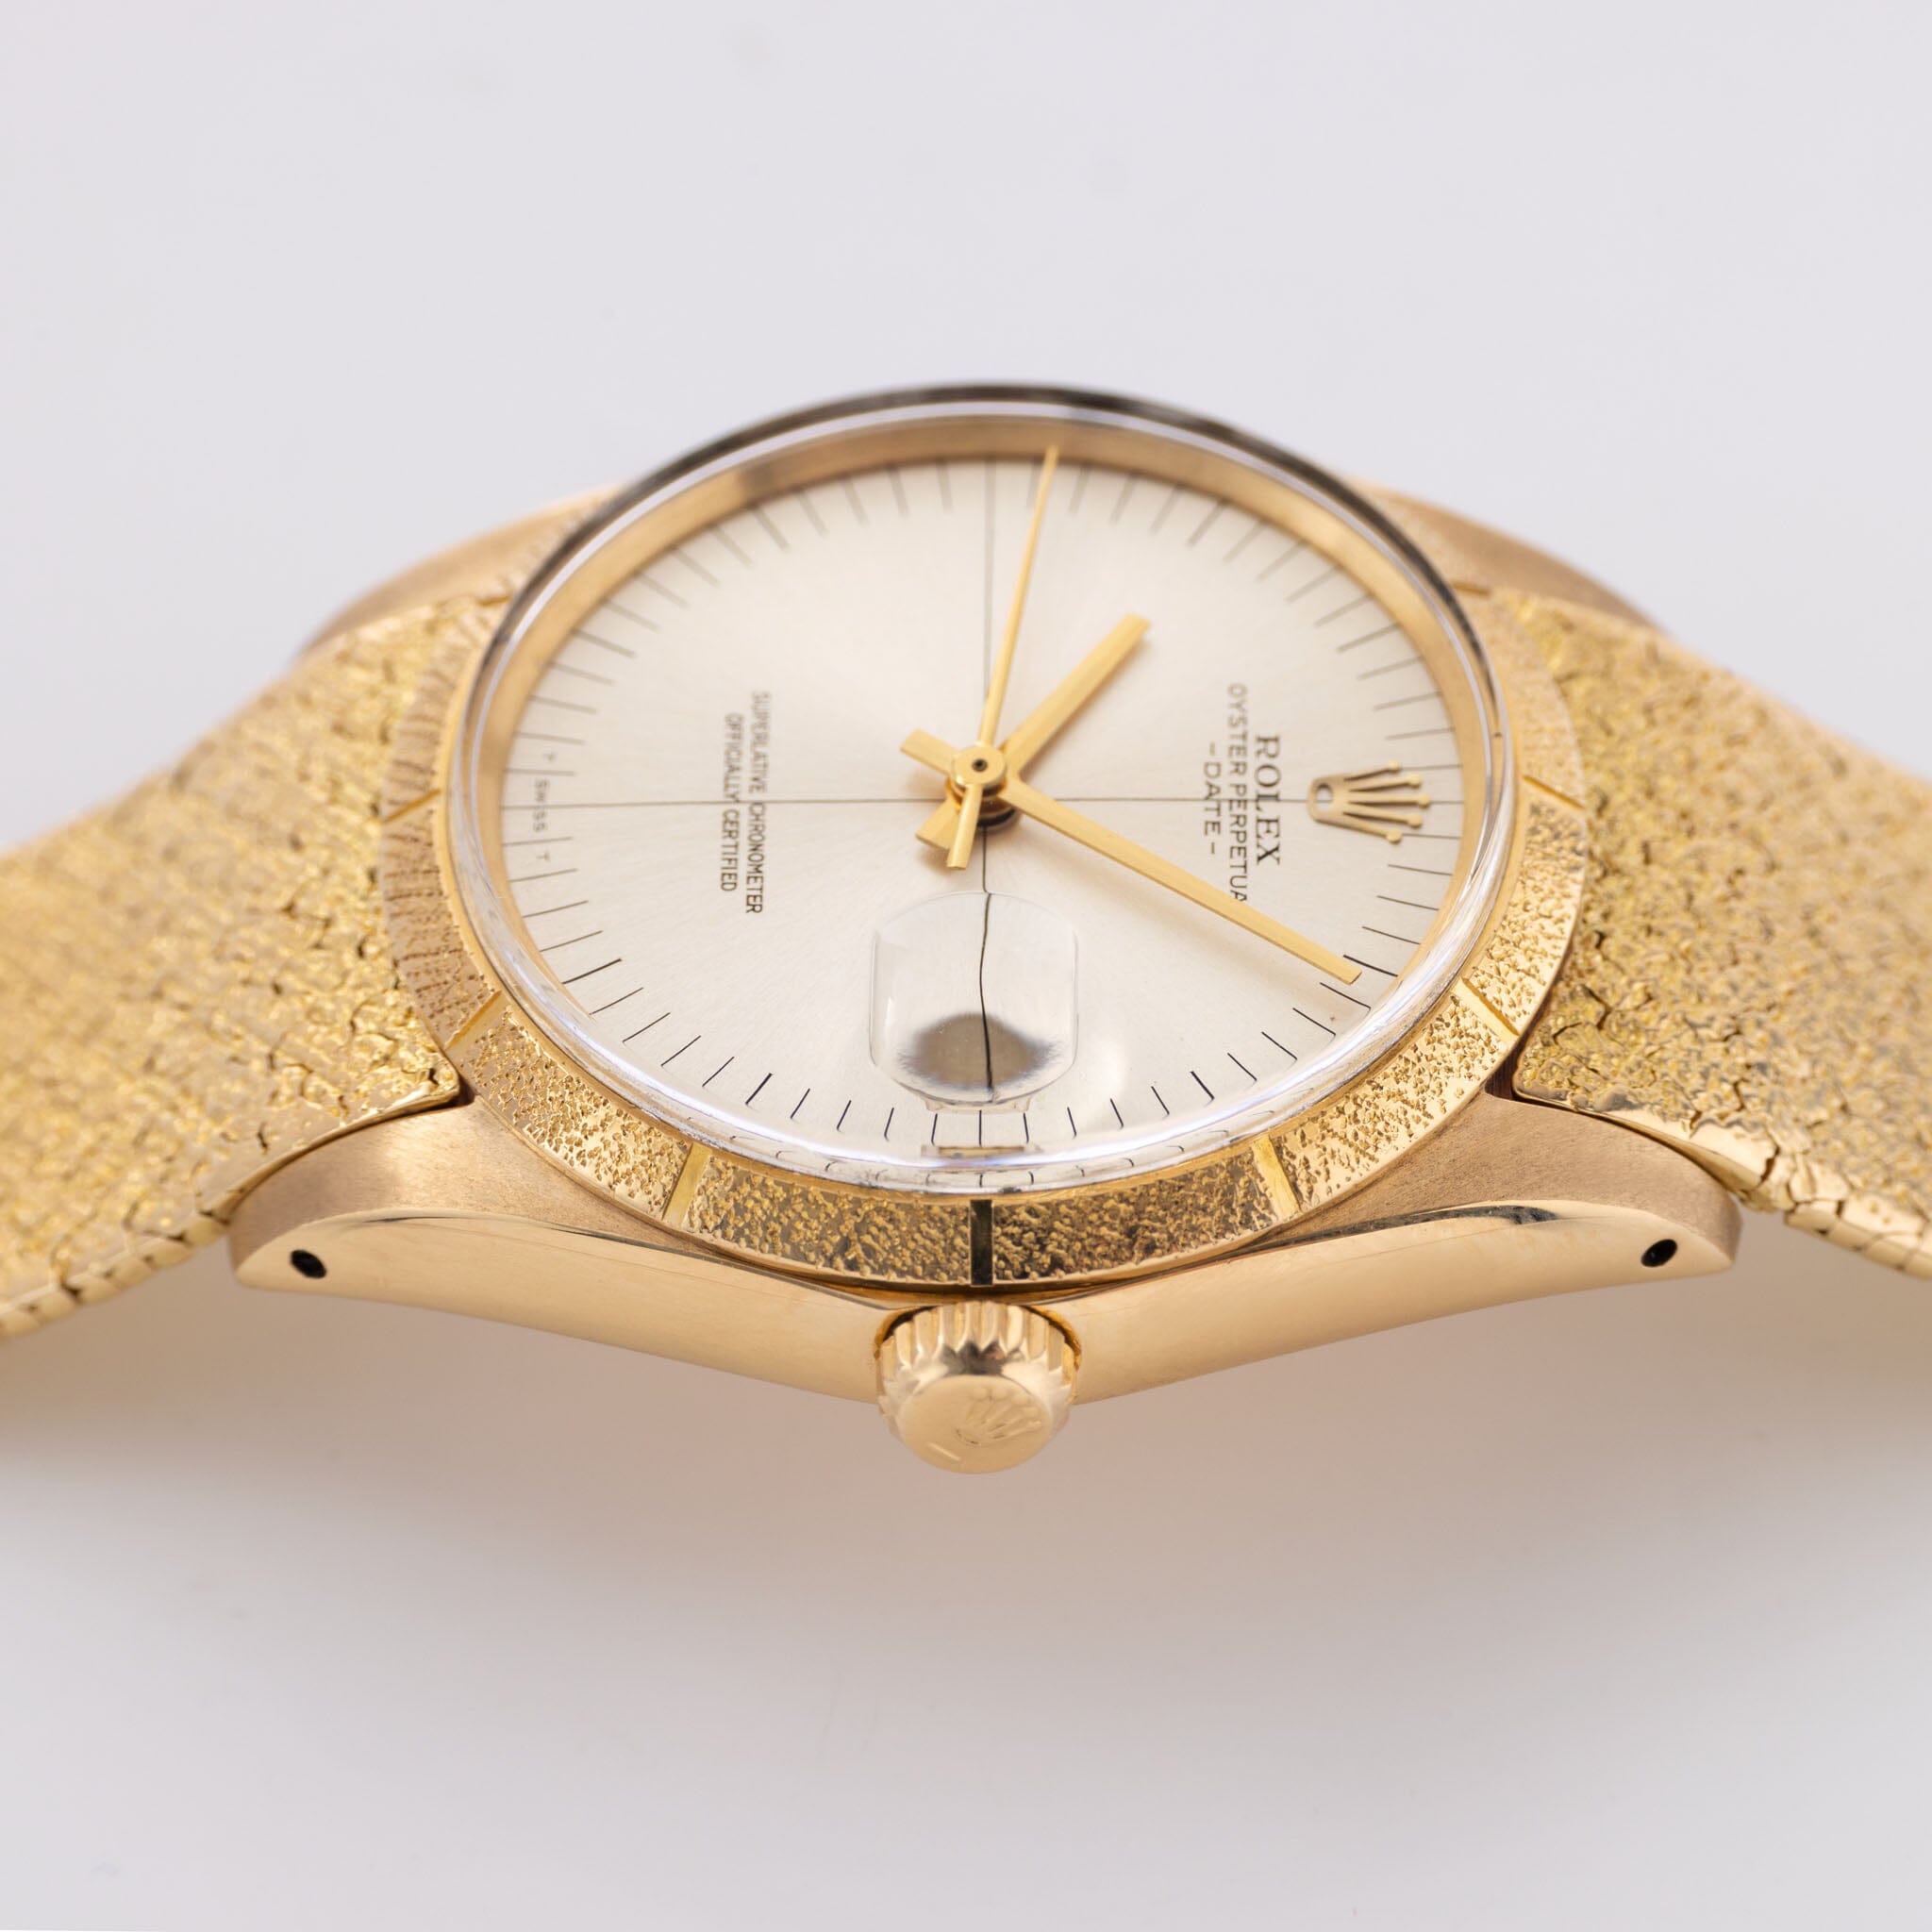 Rolex Zephyr Date Yellow Gold Reference 1510